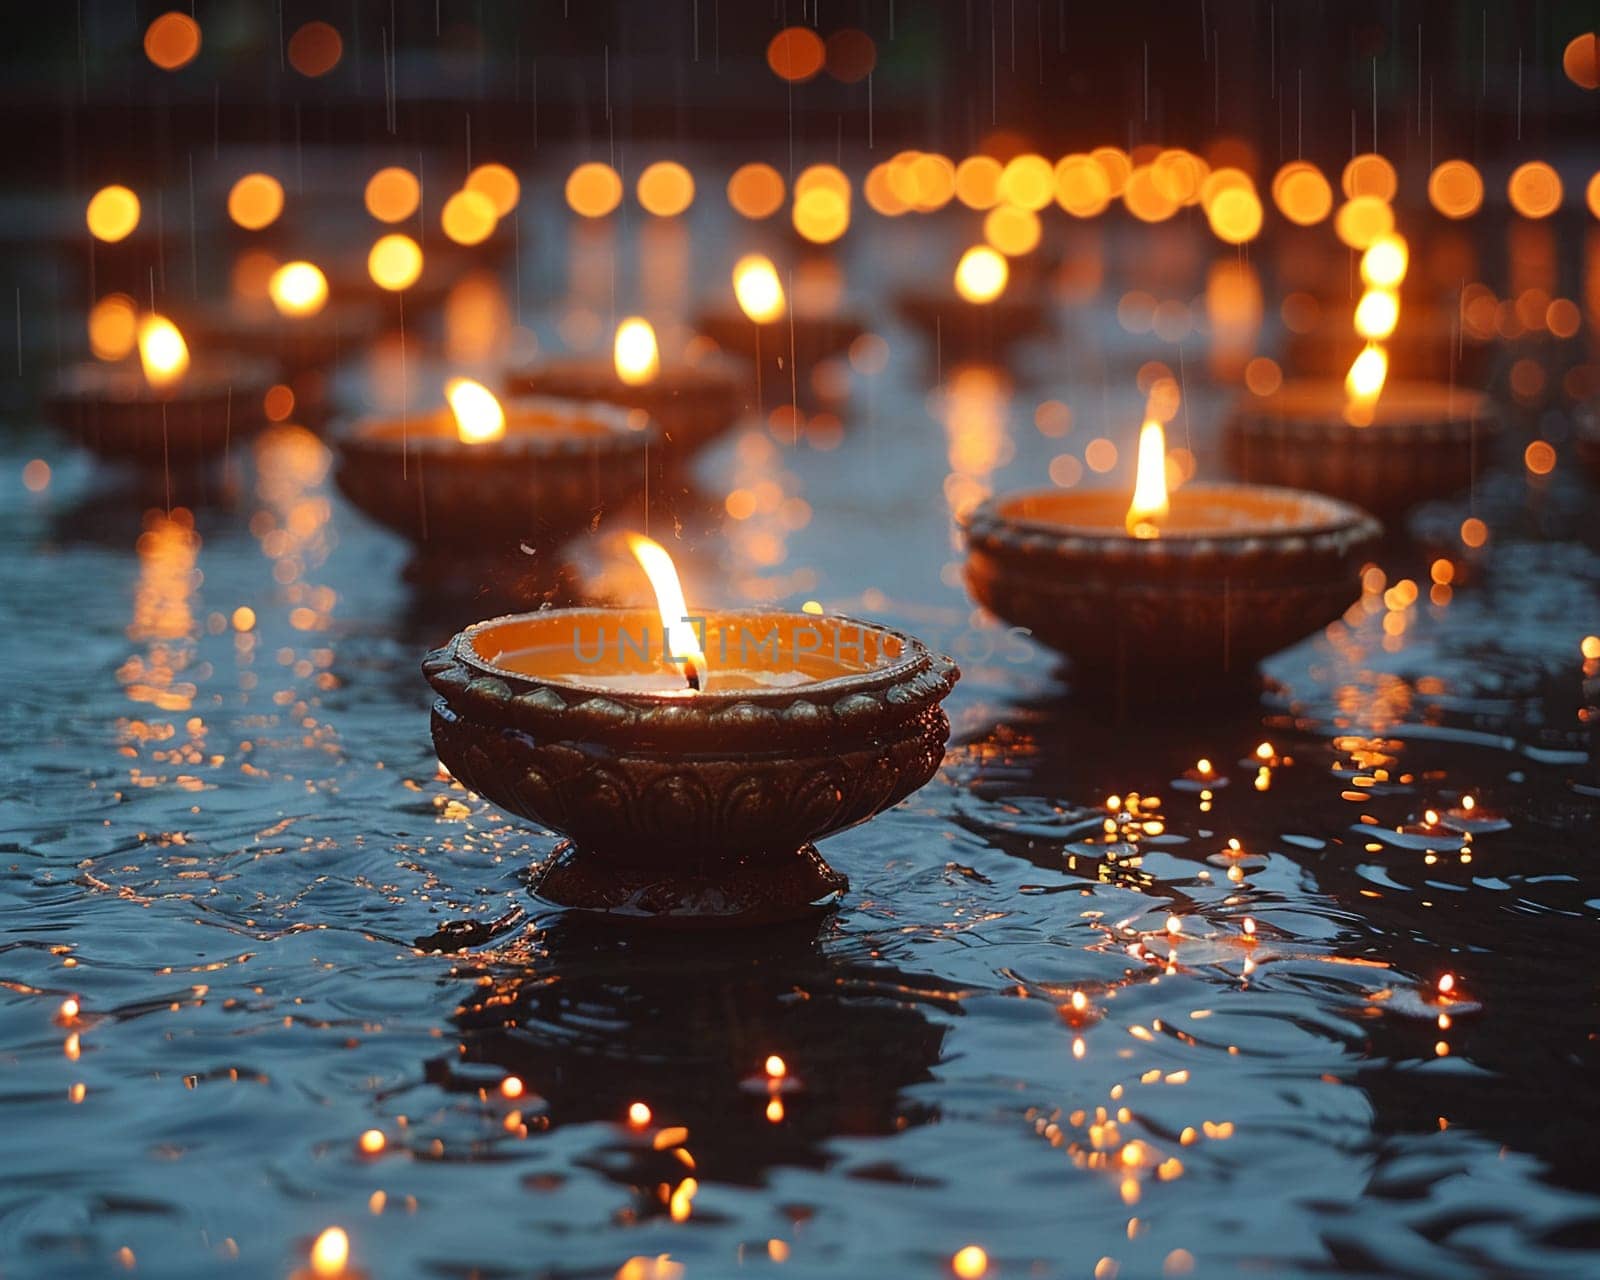 Hindu Diya Lamps Casting Soft Glows for Diwali, The lights blur together, celebrating the victory of light over darkness.